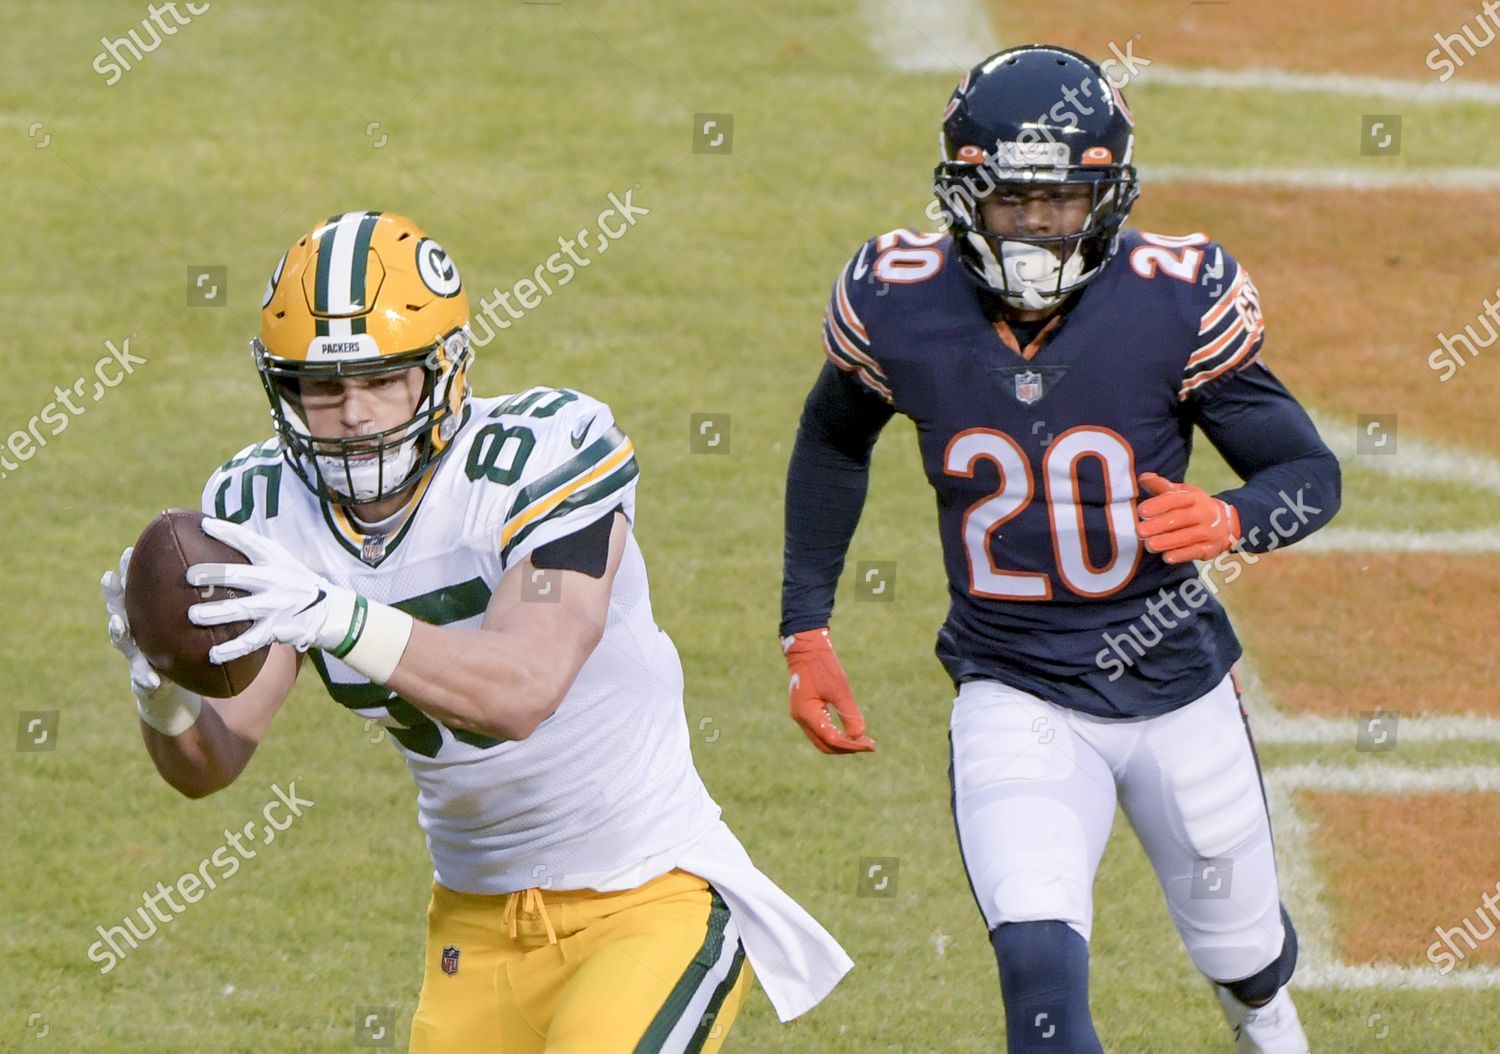 Packers Vs Bears 2021 : Bears Vs Saints 2021 Nfl Playoffs Matchups Schedule For Wild Card ...